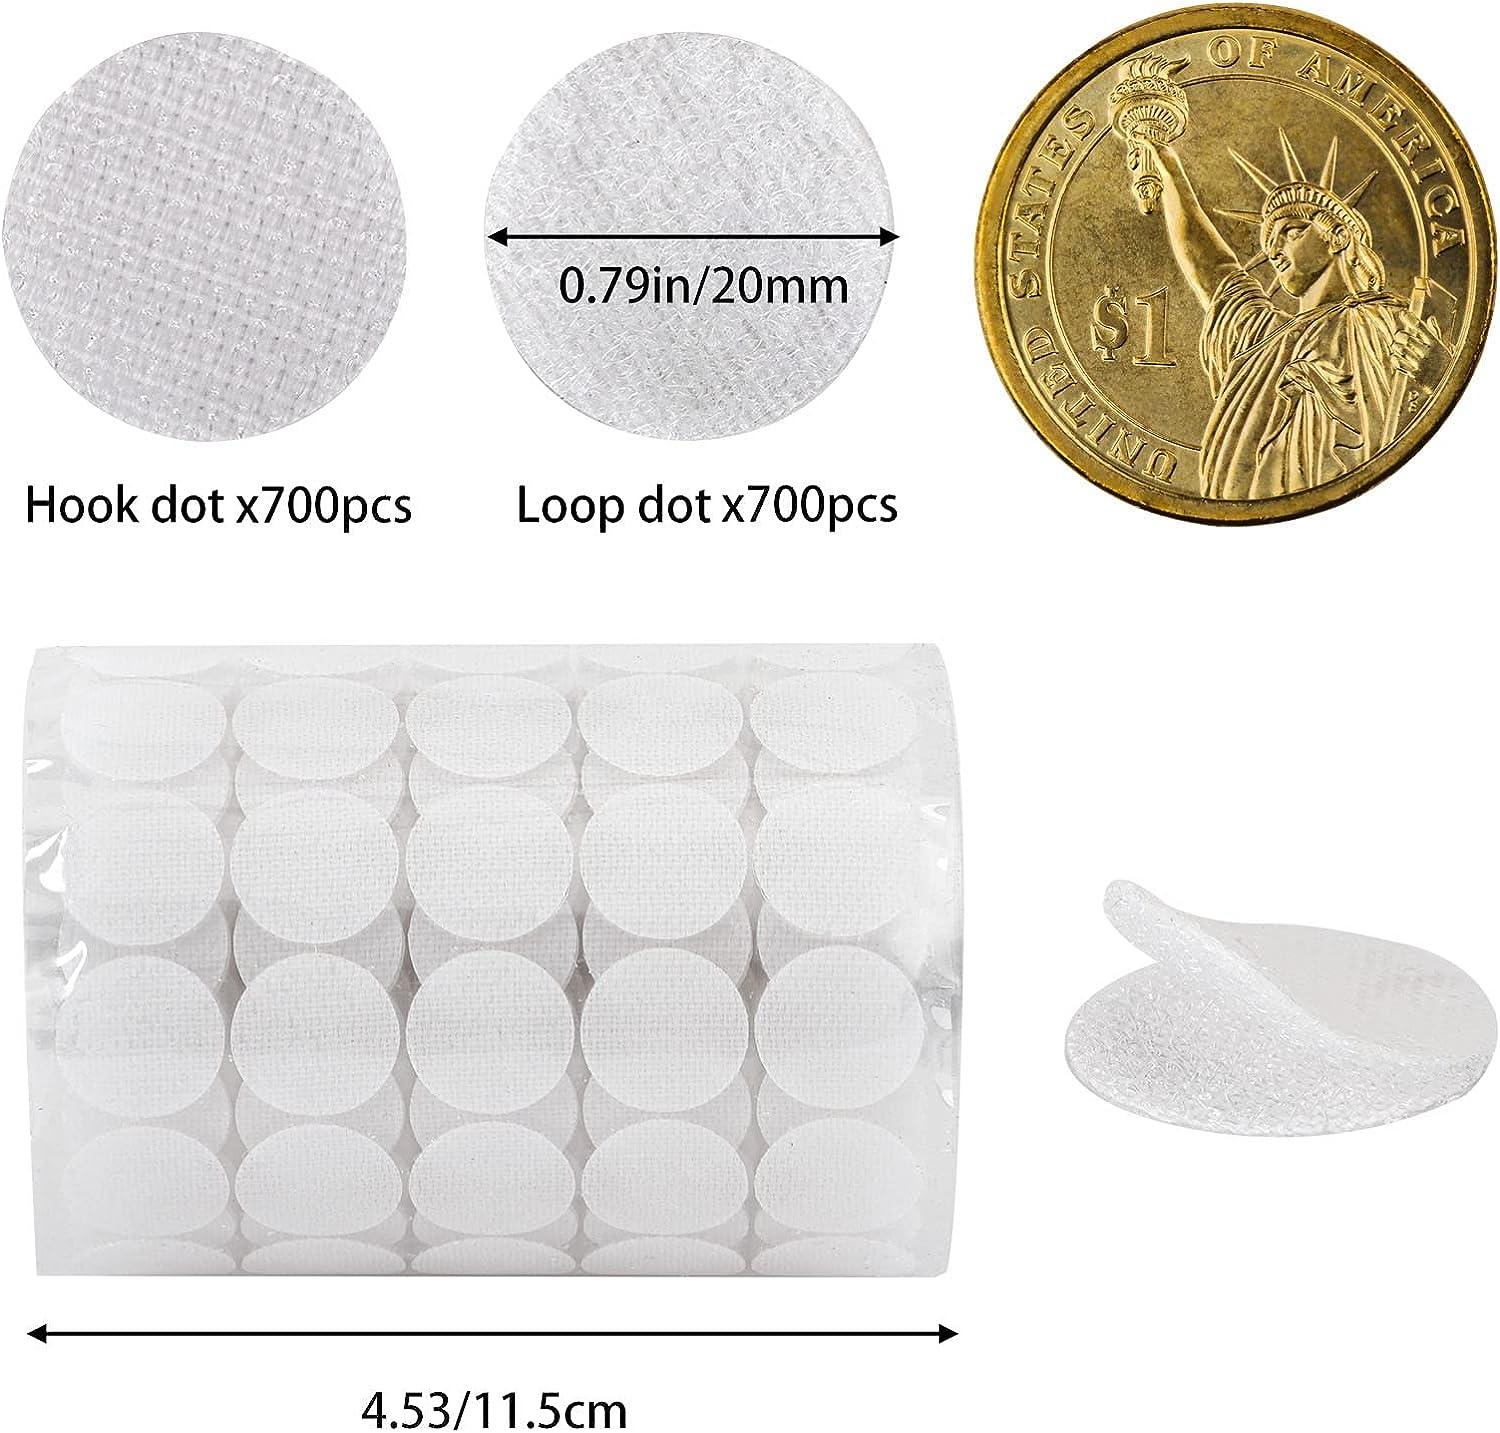 WXBOOM Self Adhesive Dots 1400pcs (700 Pairs) 0.79 Diameter White Hook &  Loop Dots Sticky Back Coins 20mm for School Classroom Office Home  1.0.79-1400